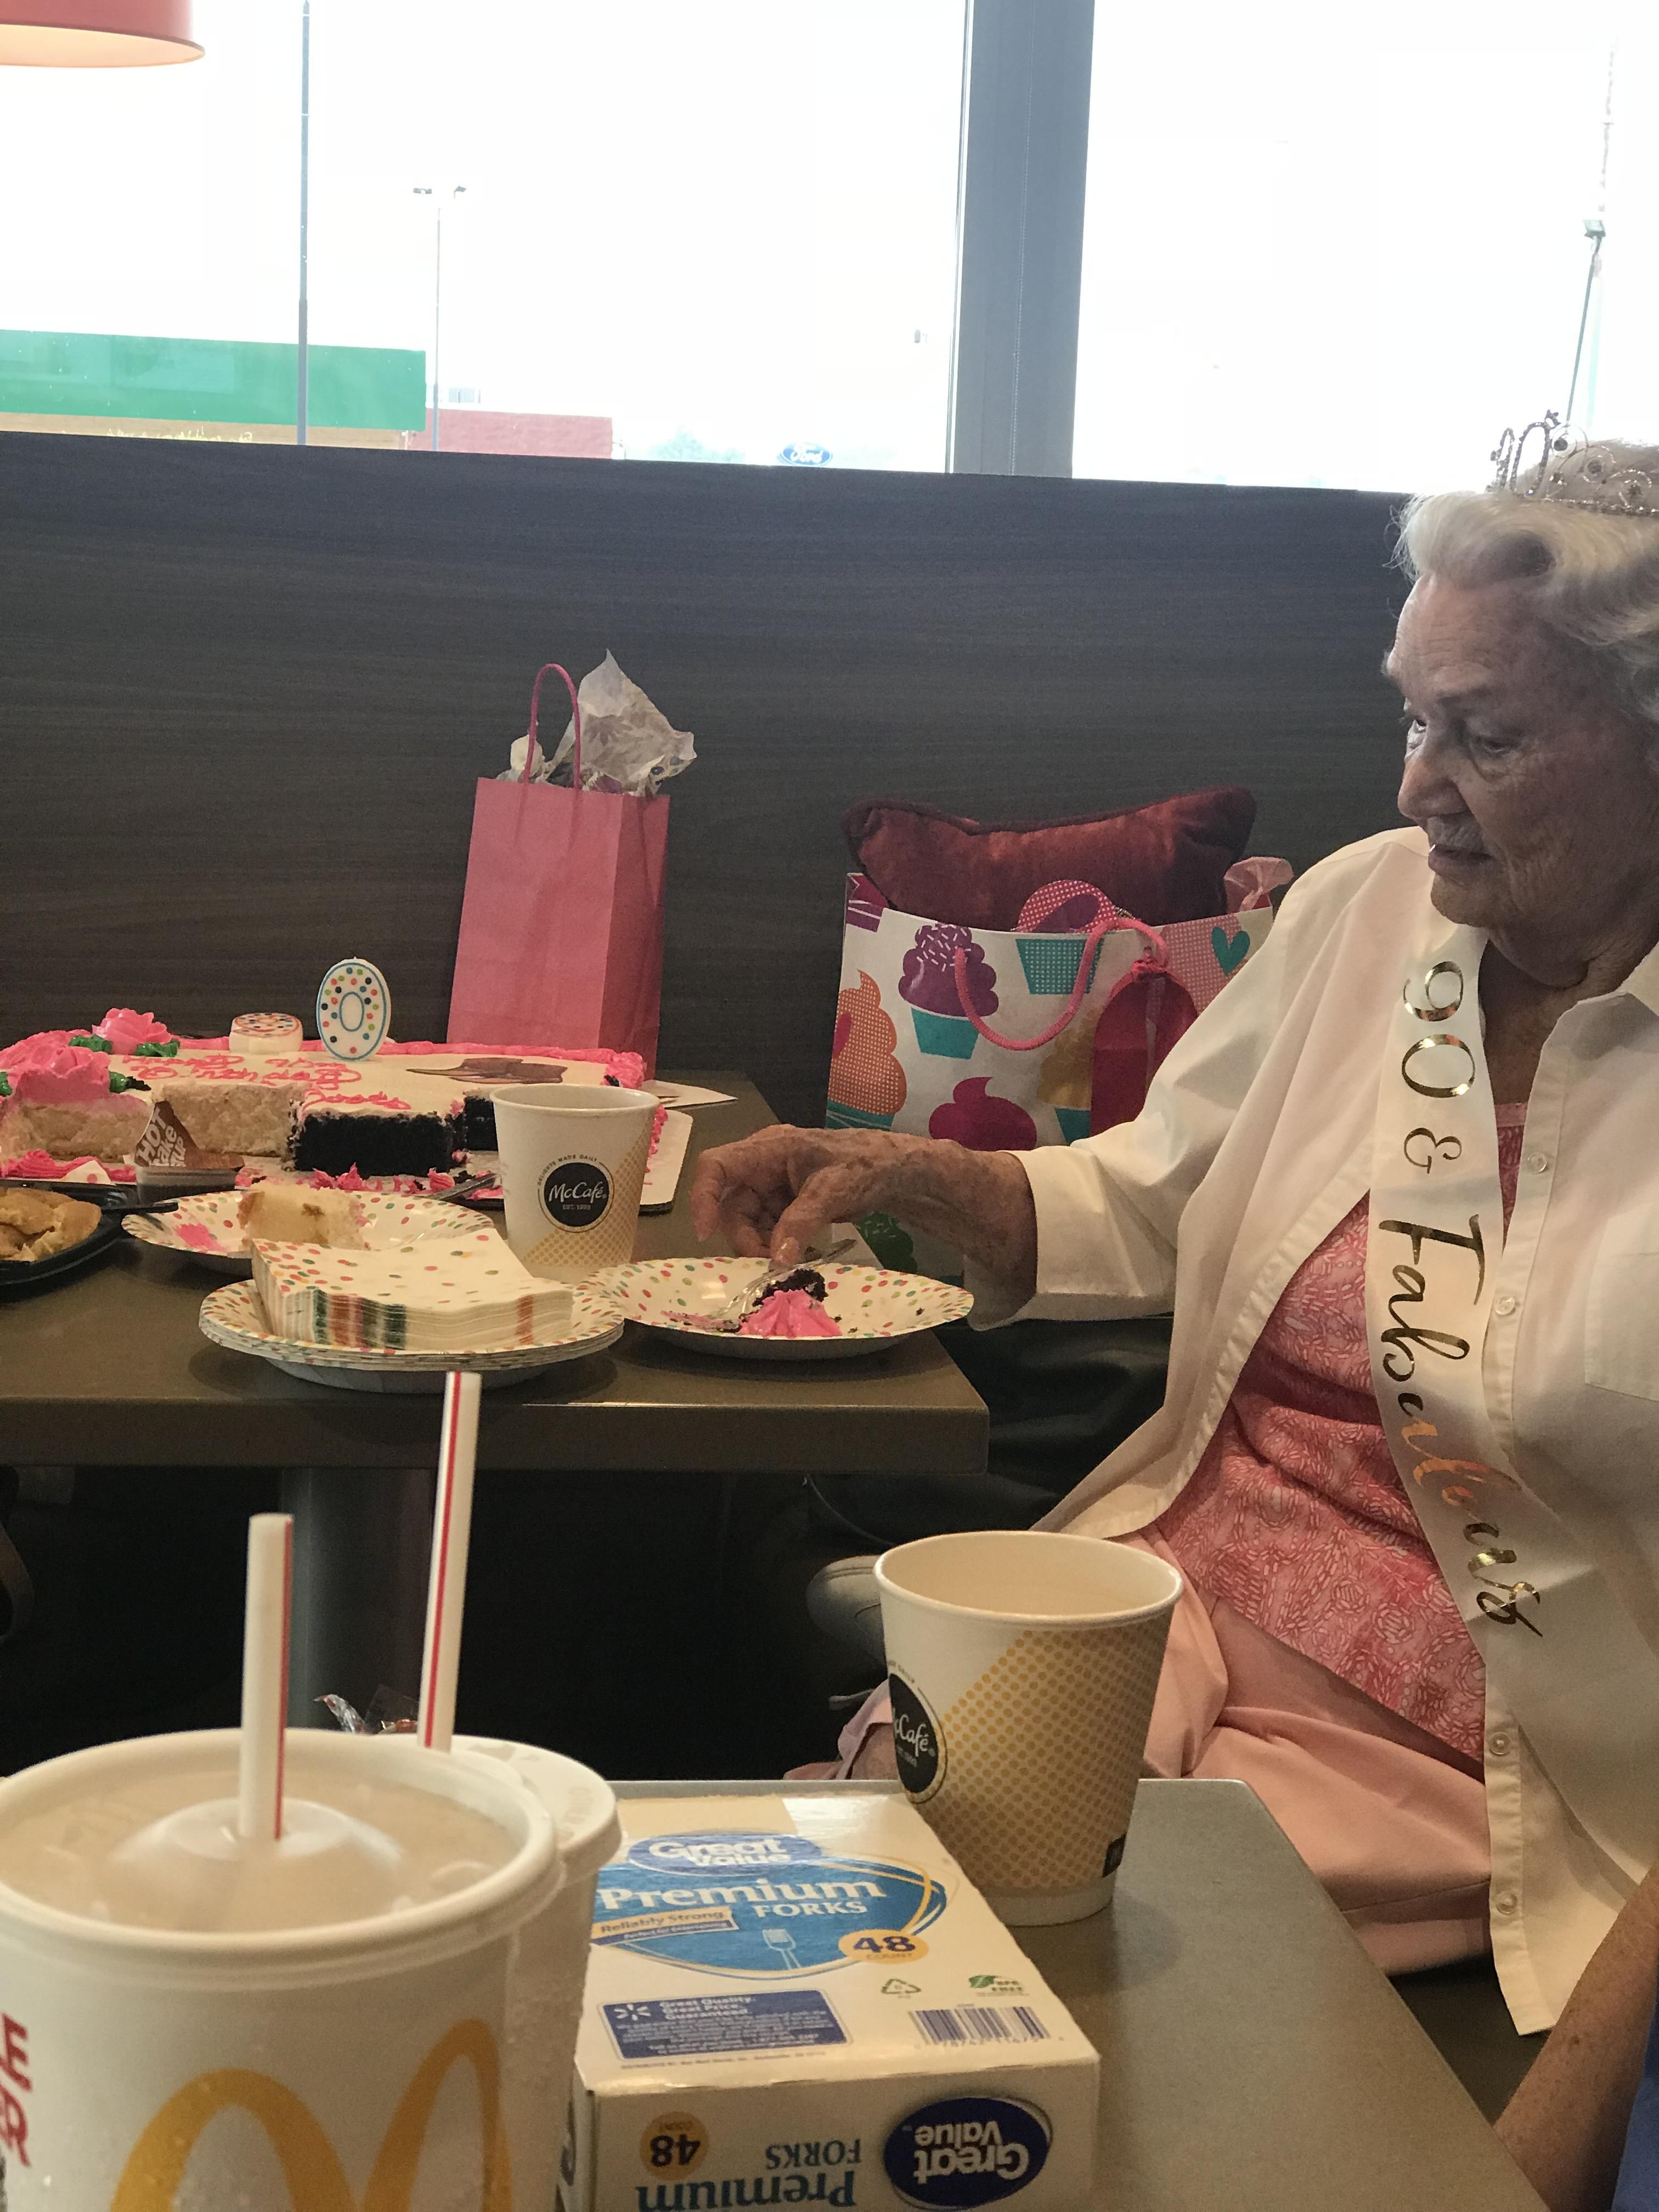 My grandma turned 90 today. Every morning she goes to the MacDonalds for coffee and they had a party for her.